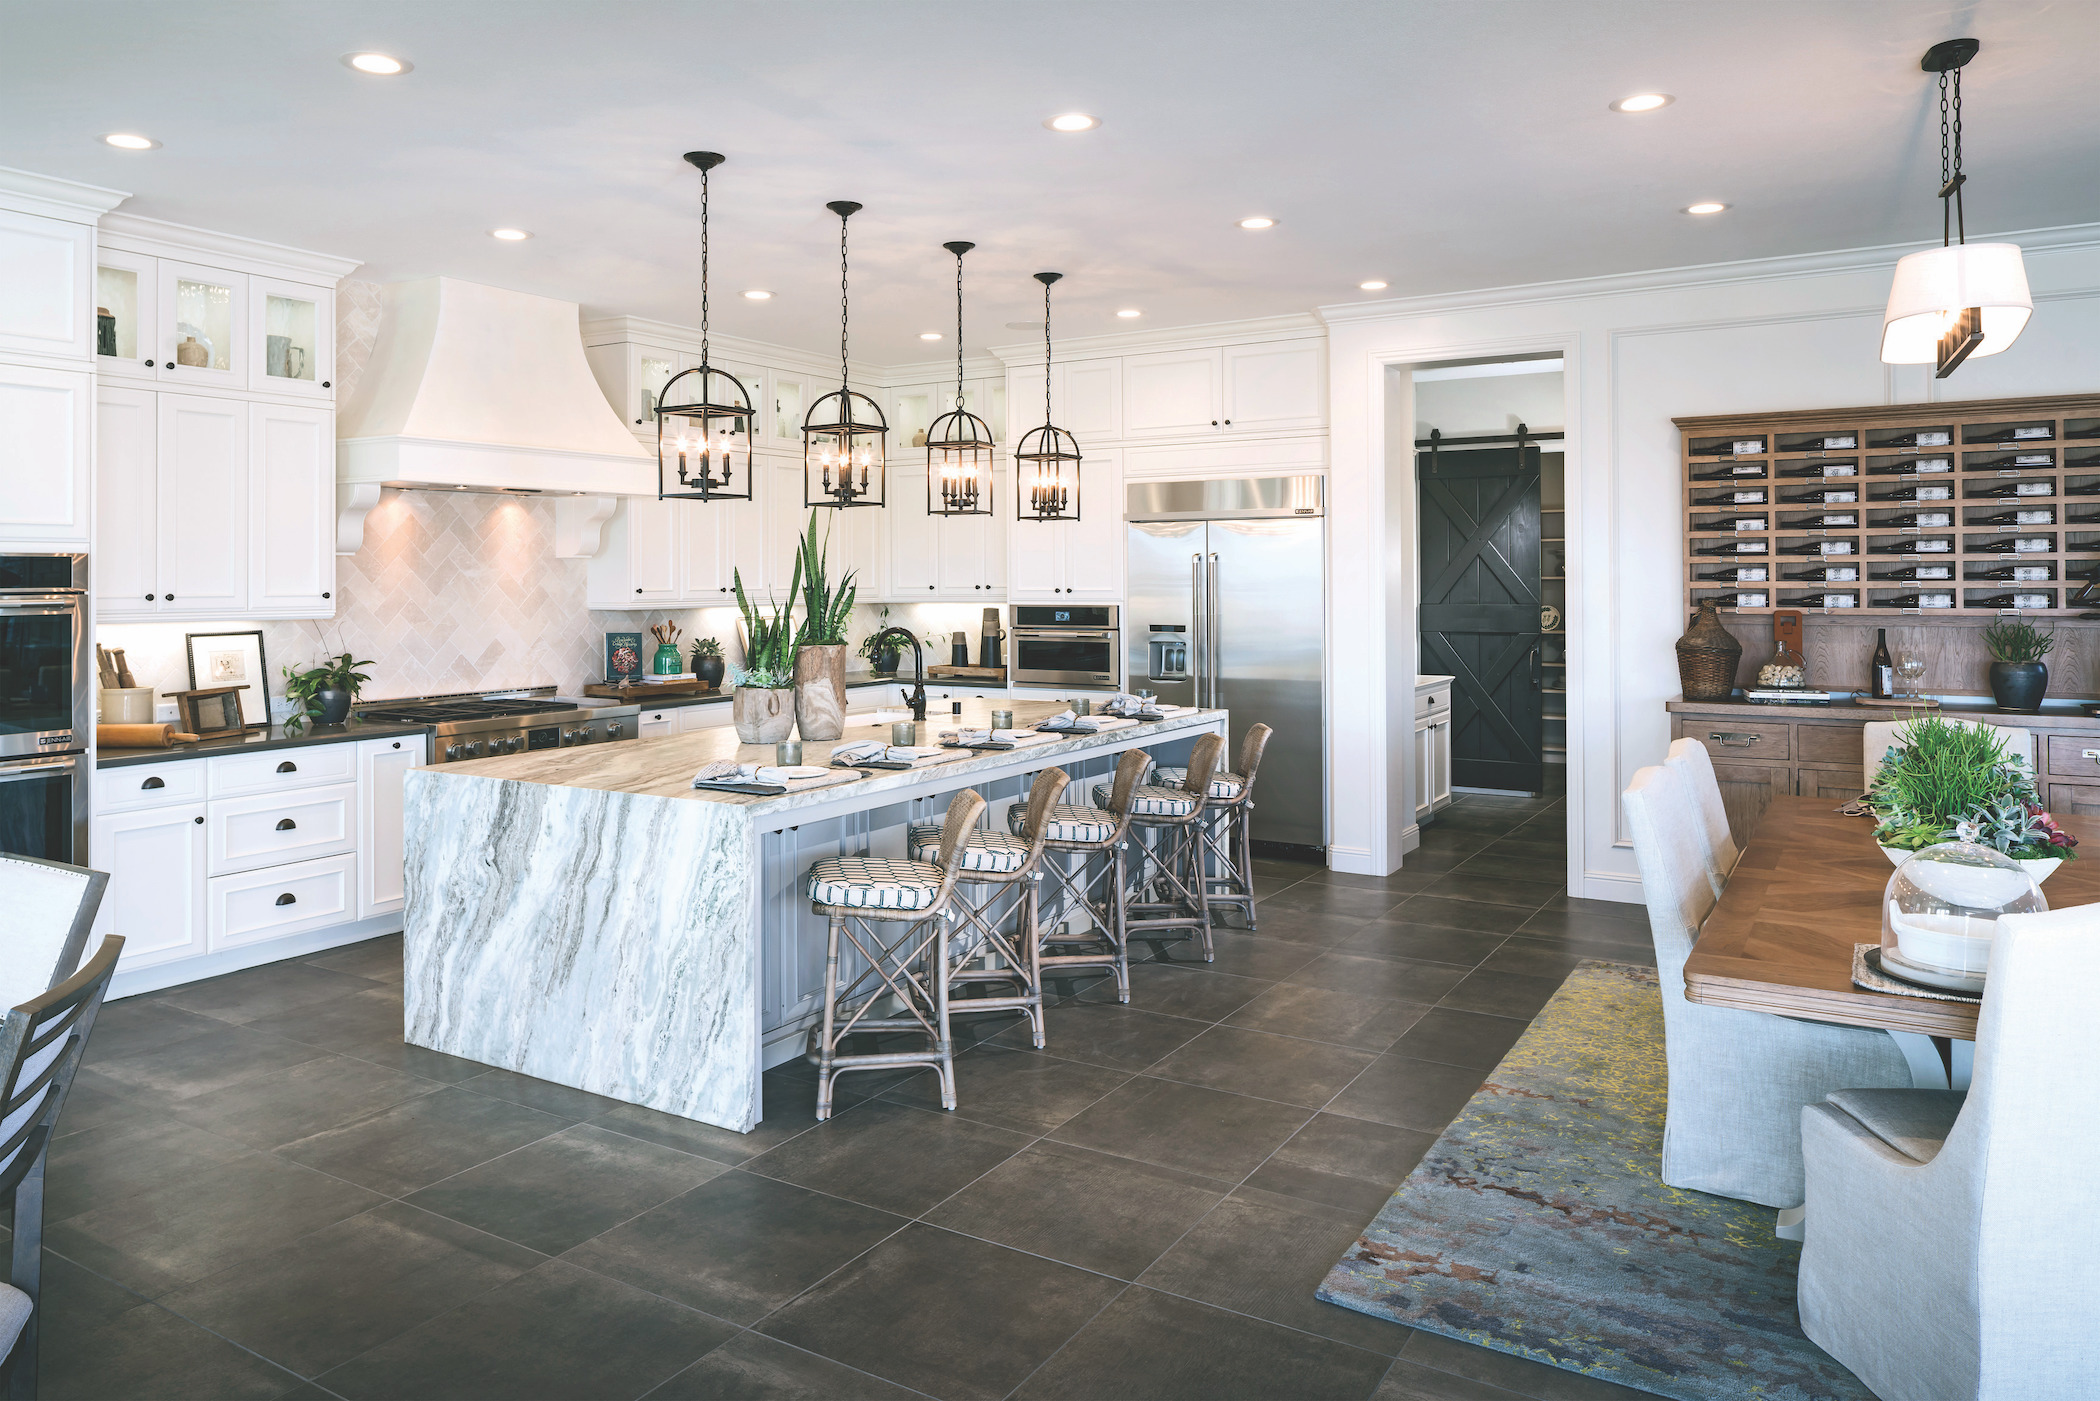 Open-concept kitchen featuring large marble island and matching pendant lighting.